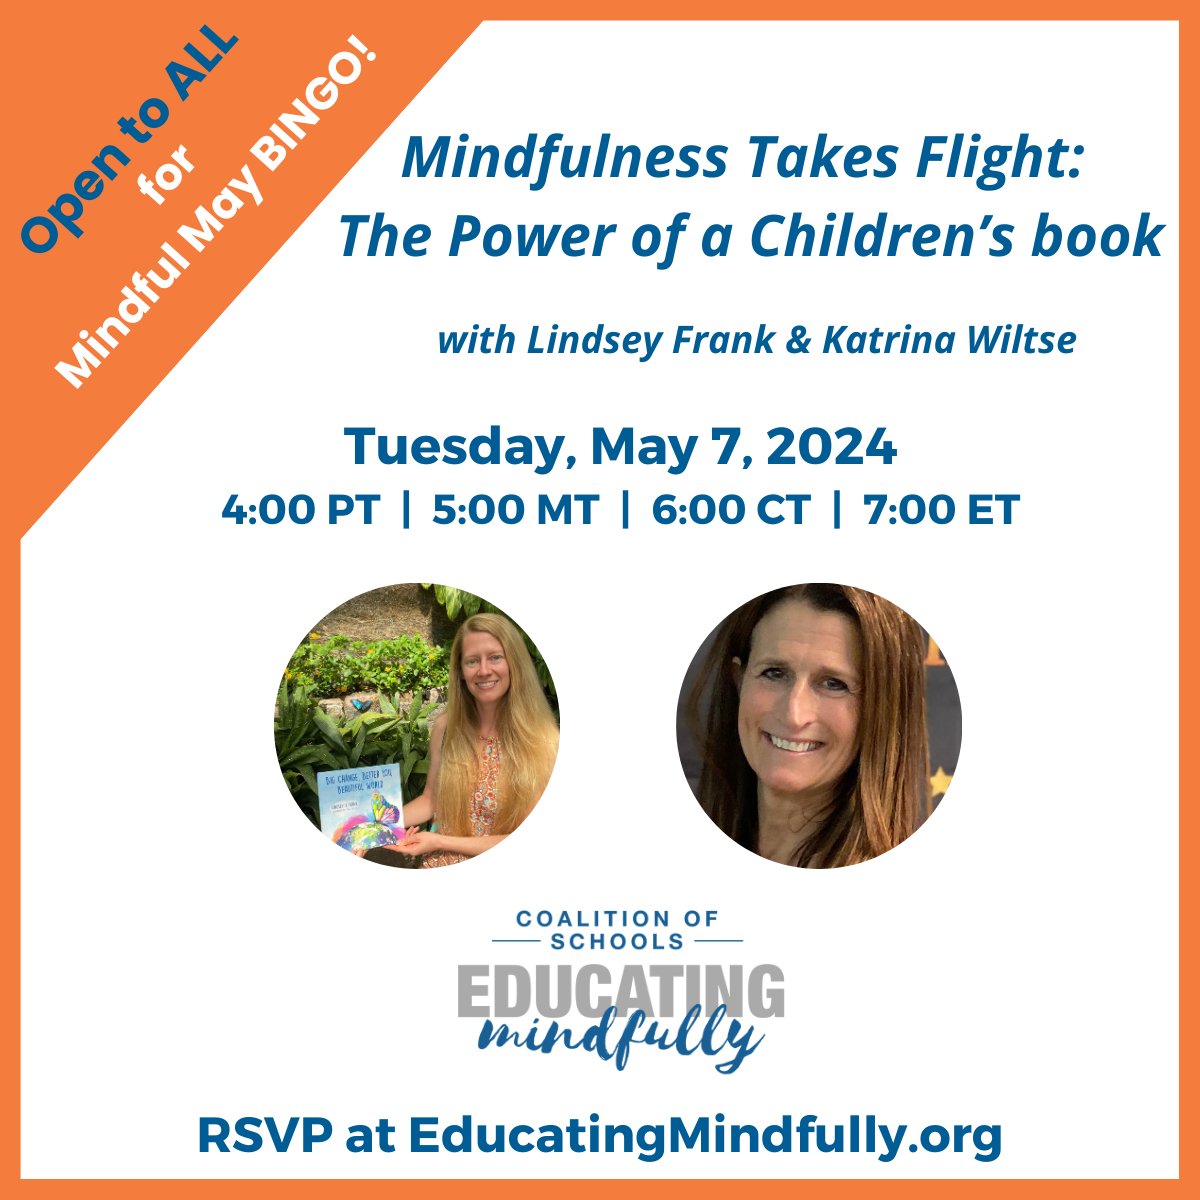 TODAY! As part of Mindful May, this Member Event is OPEN TO ALL so you can see what COSEM is all about! #Mindfuless #SocialEmotionalLearning #SEL #ChildrensBooks #Mindful #MBSEL #Education #MindfulLeaders #MindfulnessInEducation #MindfulEvent